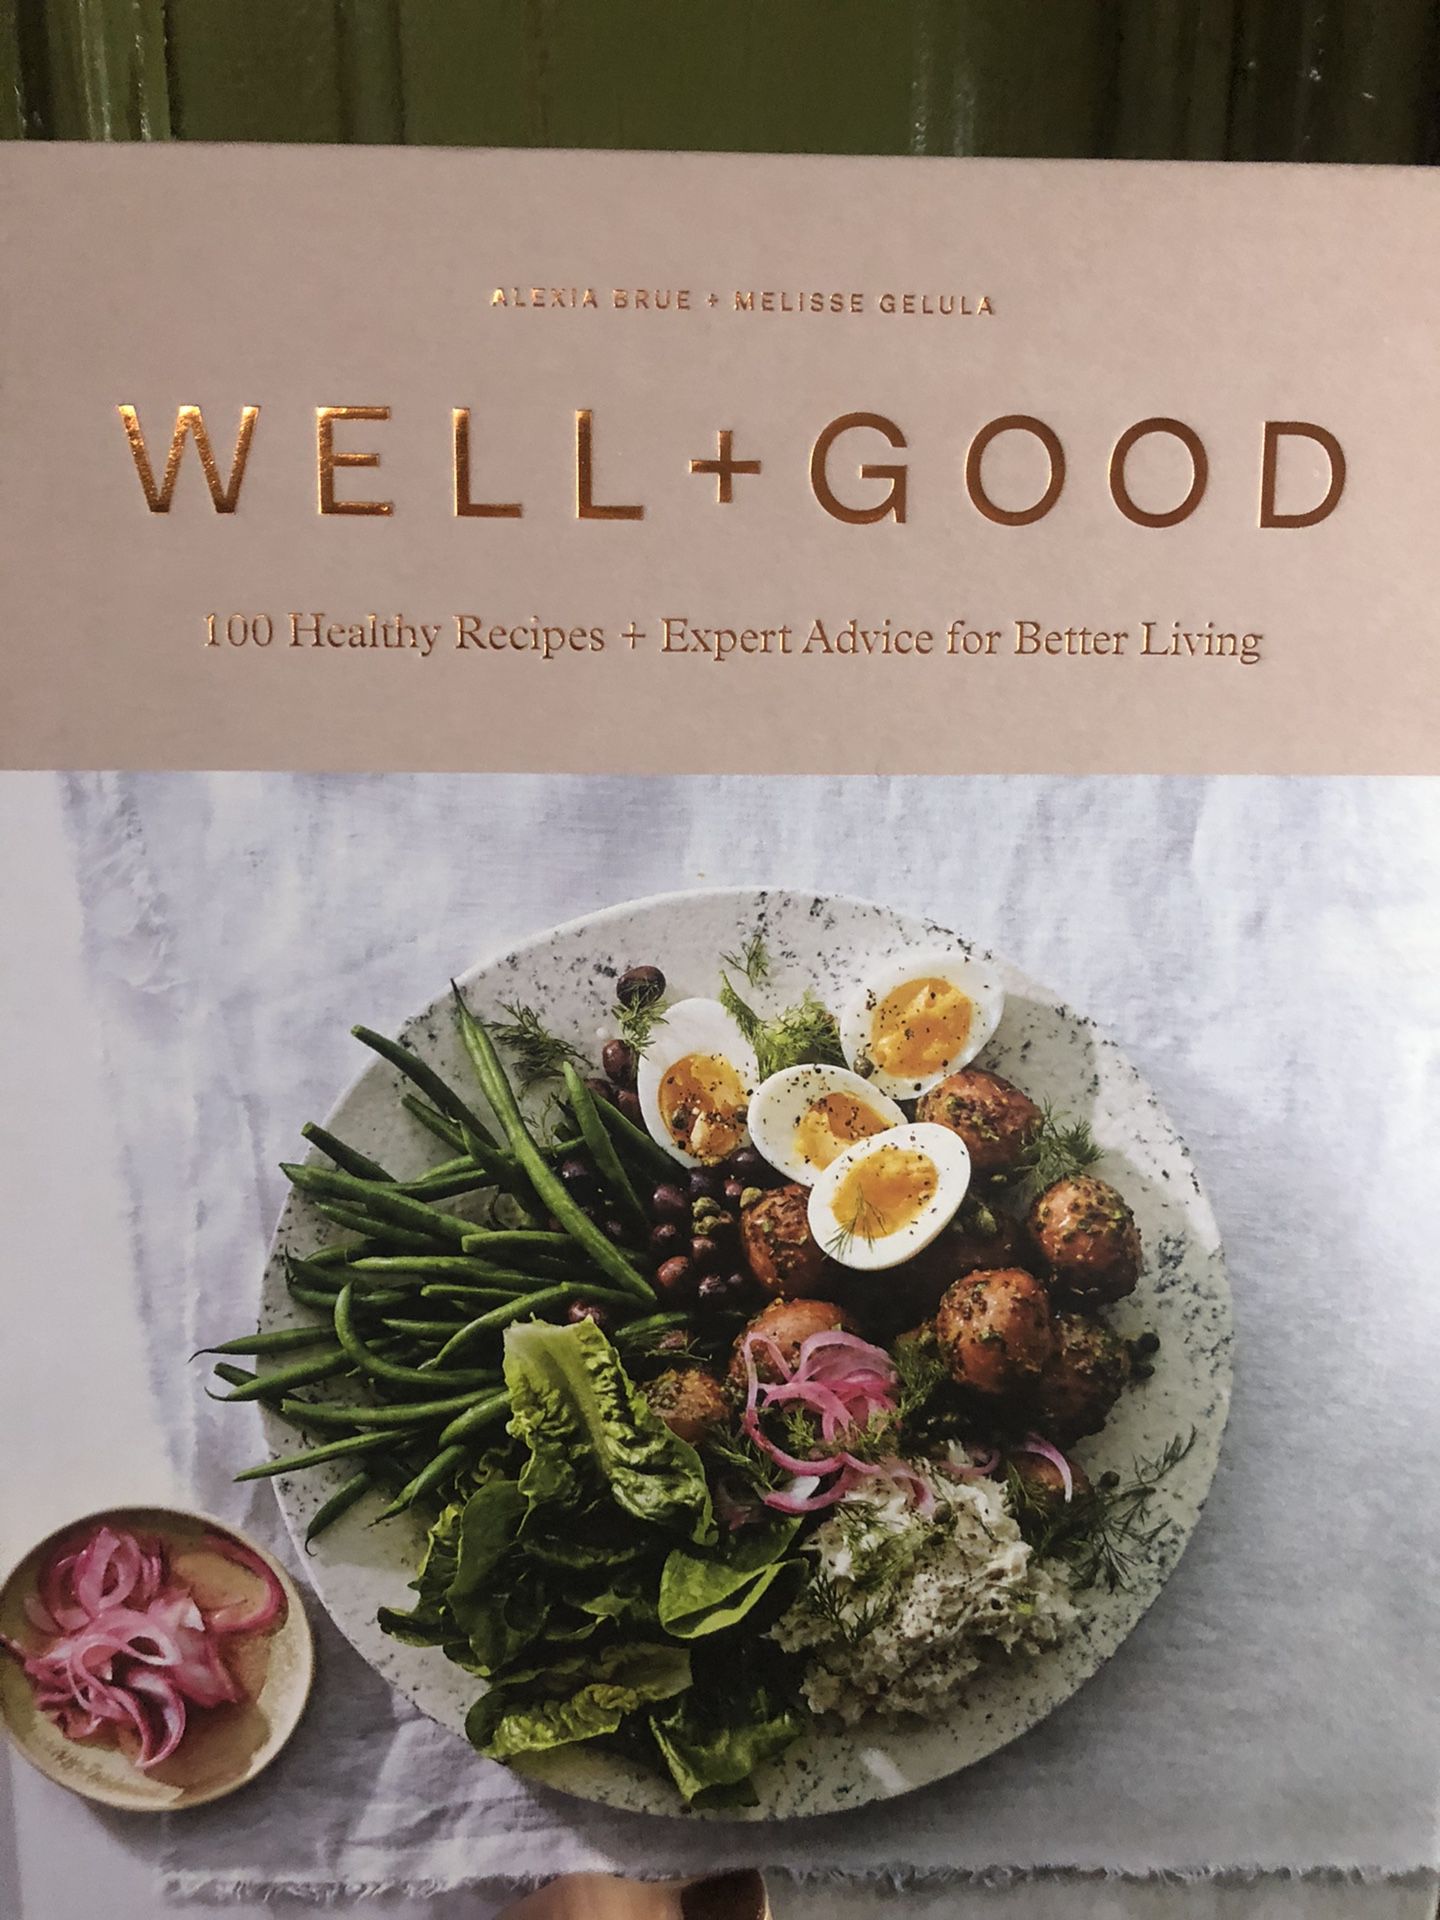 Well+Good Cookbook: 100 Healthy Recipes + Expert Advice for Better Living NEW